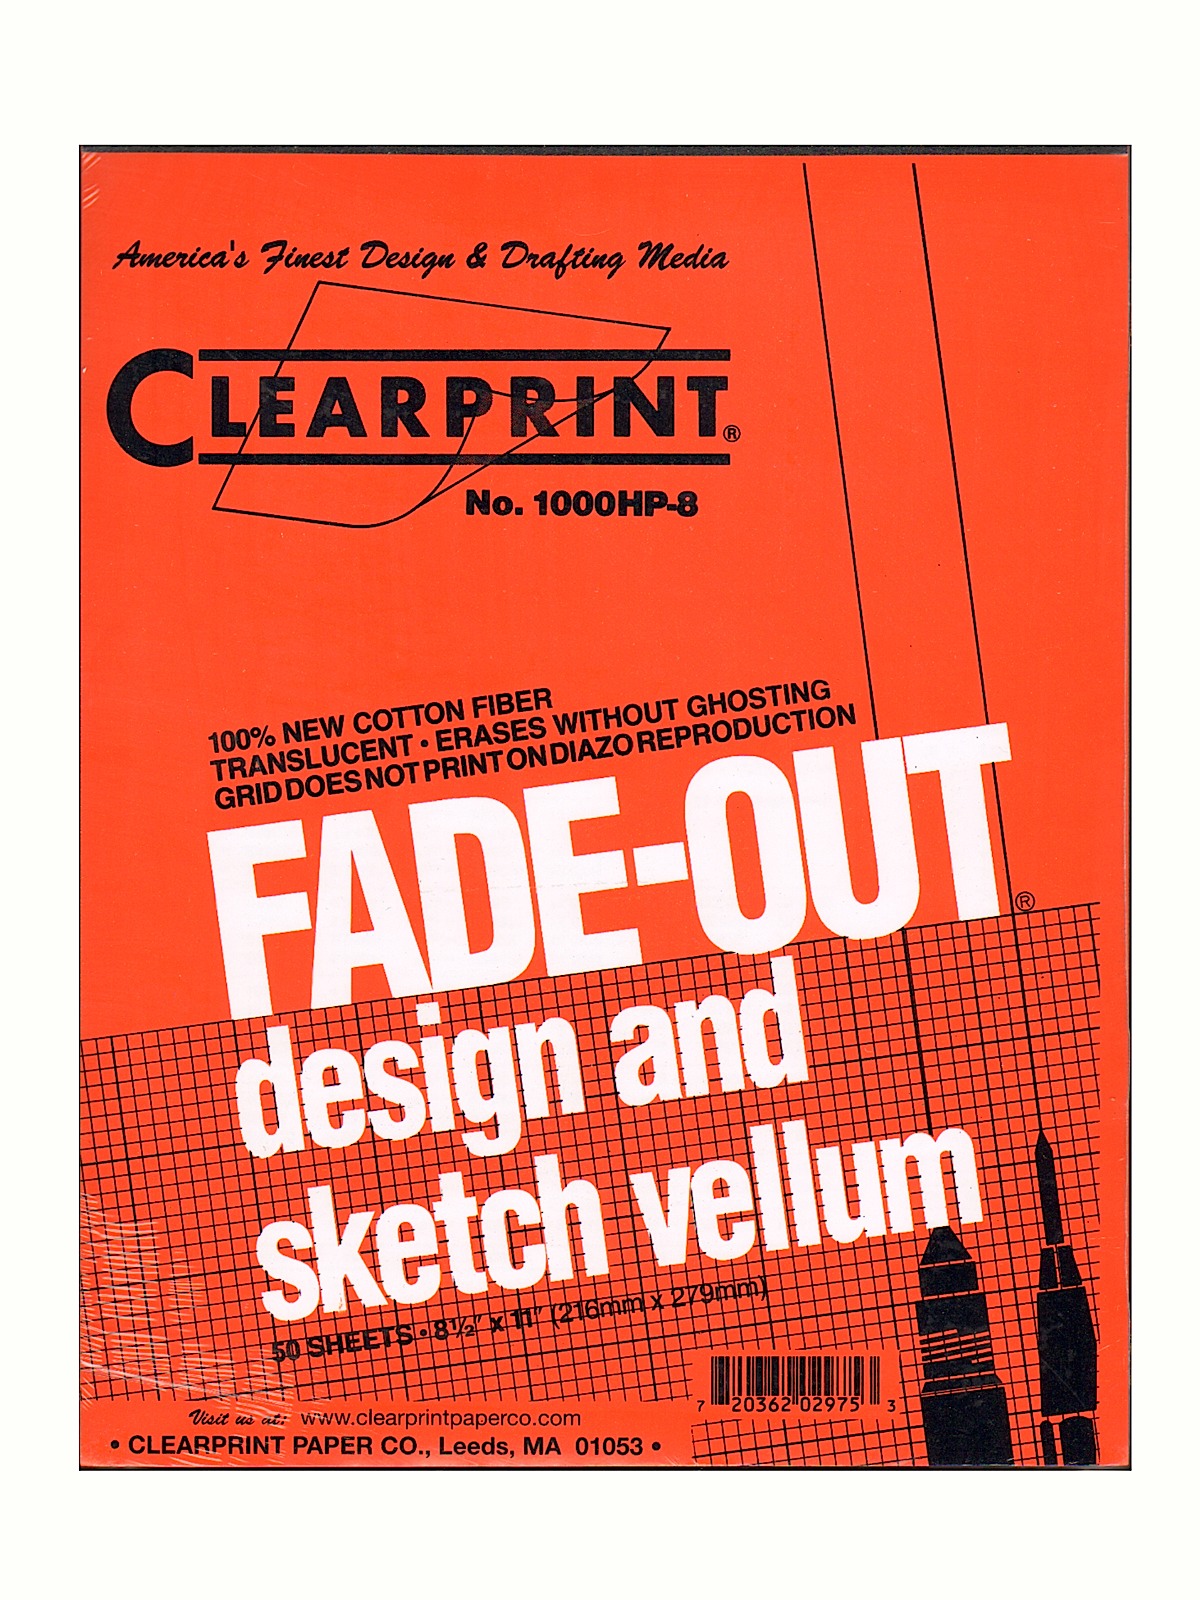 Fade-out Design And Sketch Vellum - Grid Pad 8 X 8 8 1 2 In. X 11 In. Pad Of 50